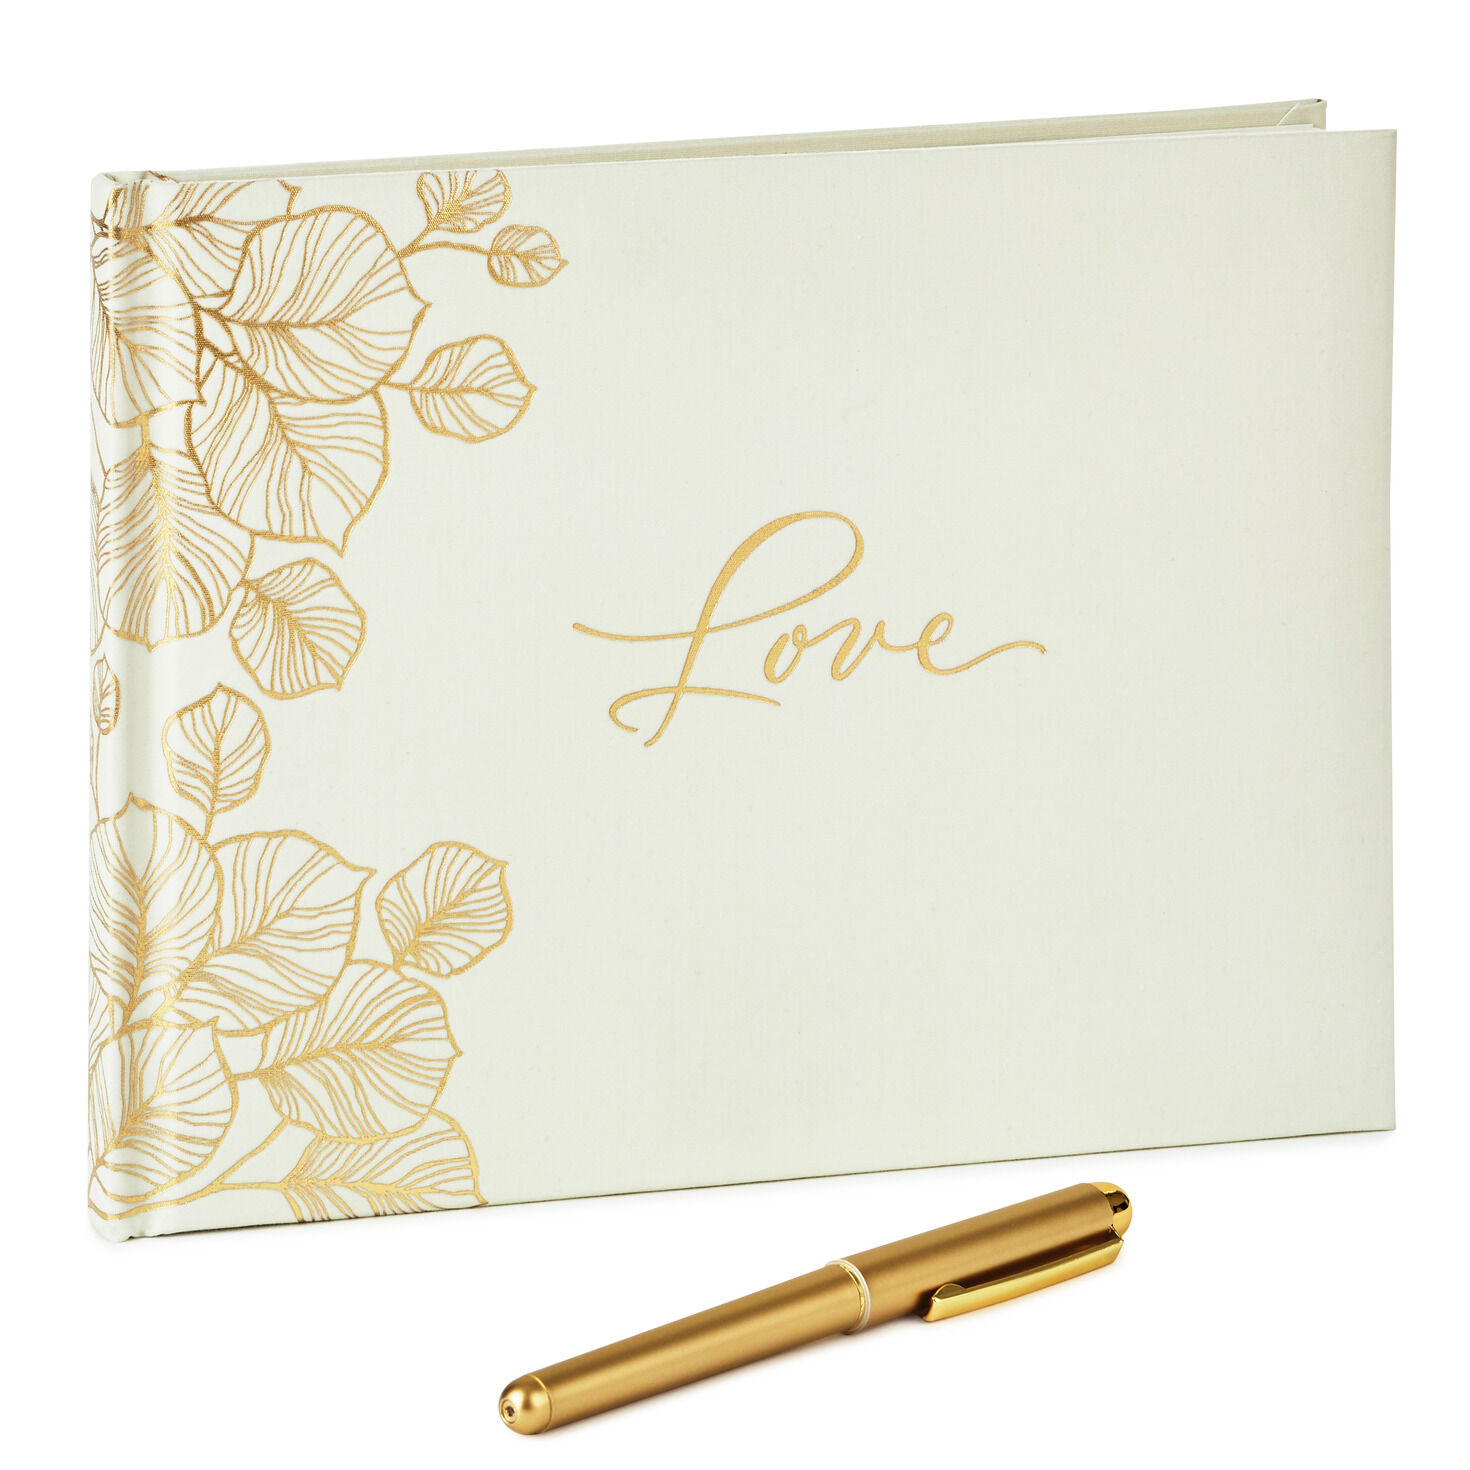 https://www.hallmark.com/dw/image/v2/AALB_PRD/on/demandware.static/-/Sites-hallmark-master/default/dw7ca0685f/images/finished-goods/products/1EDY2047/Love-Wedding-Guest-Book-With-Gold-Pen_1EDY2047_01.jpg?sfrm=jpg